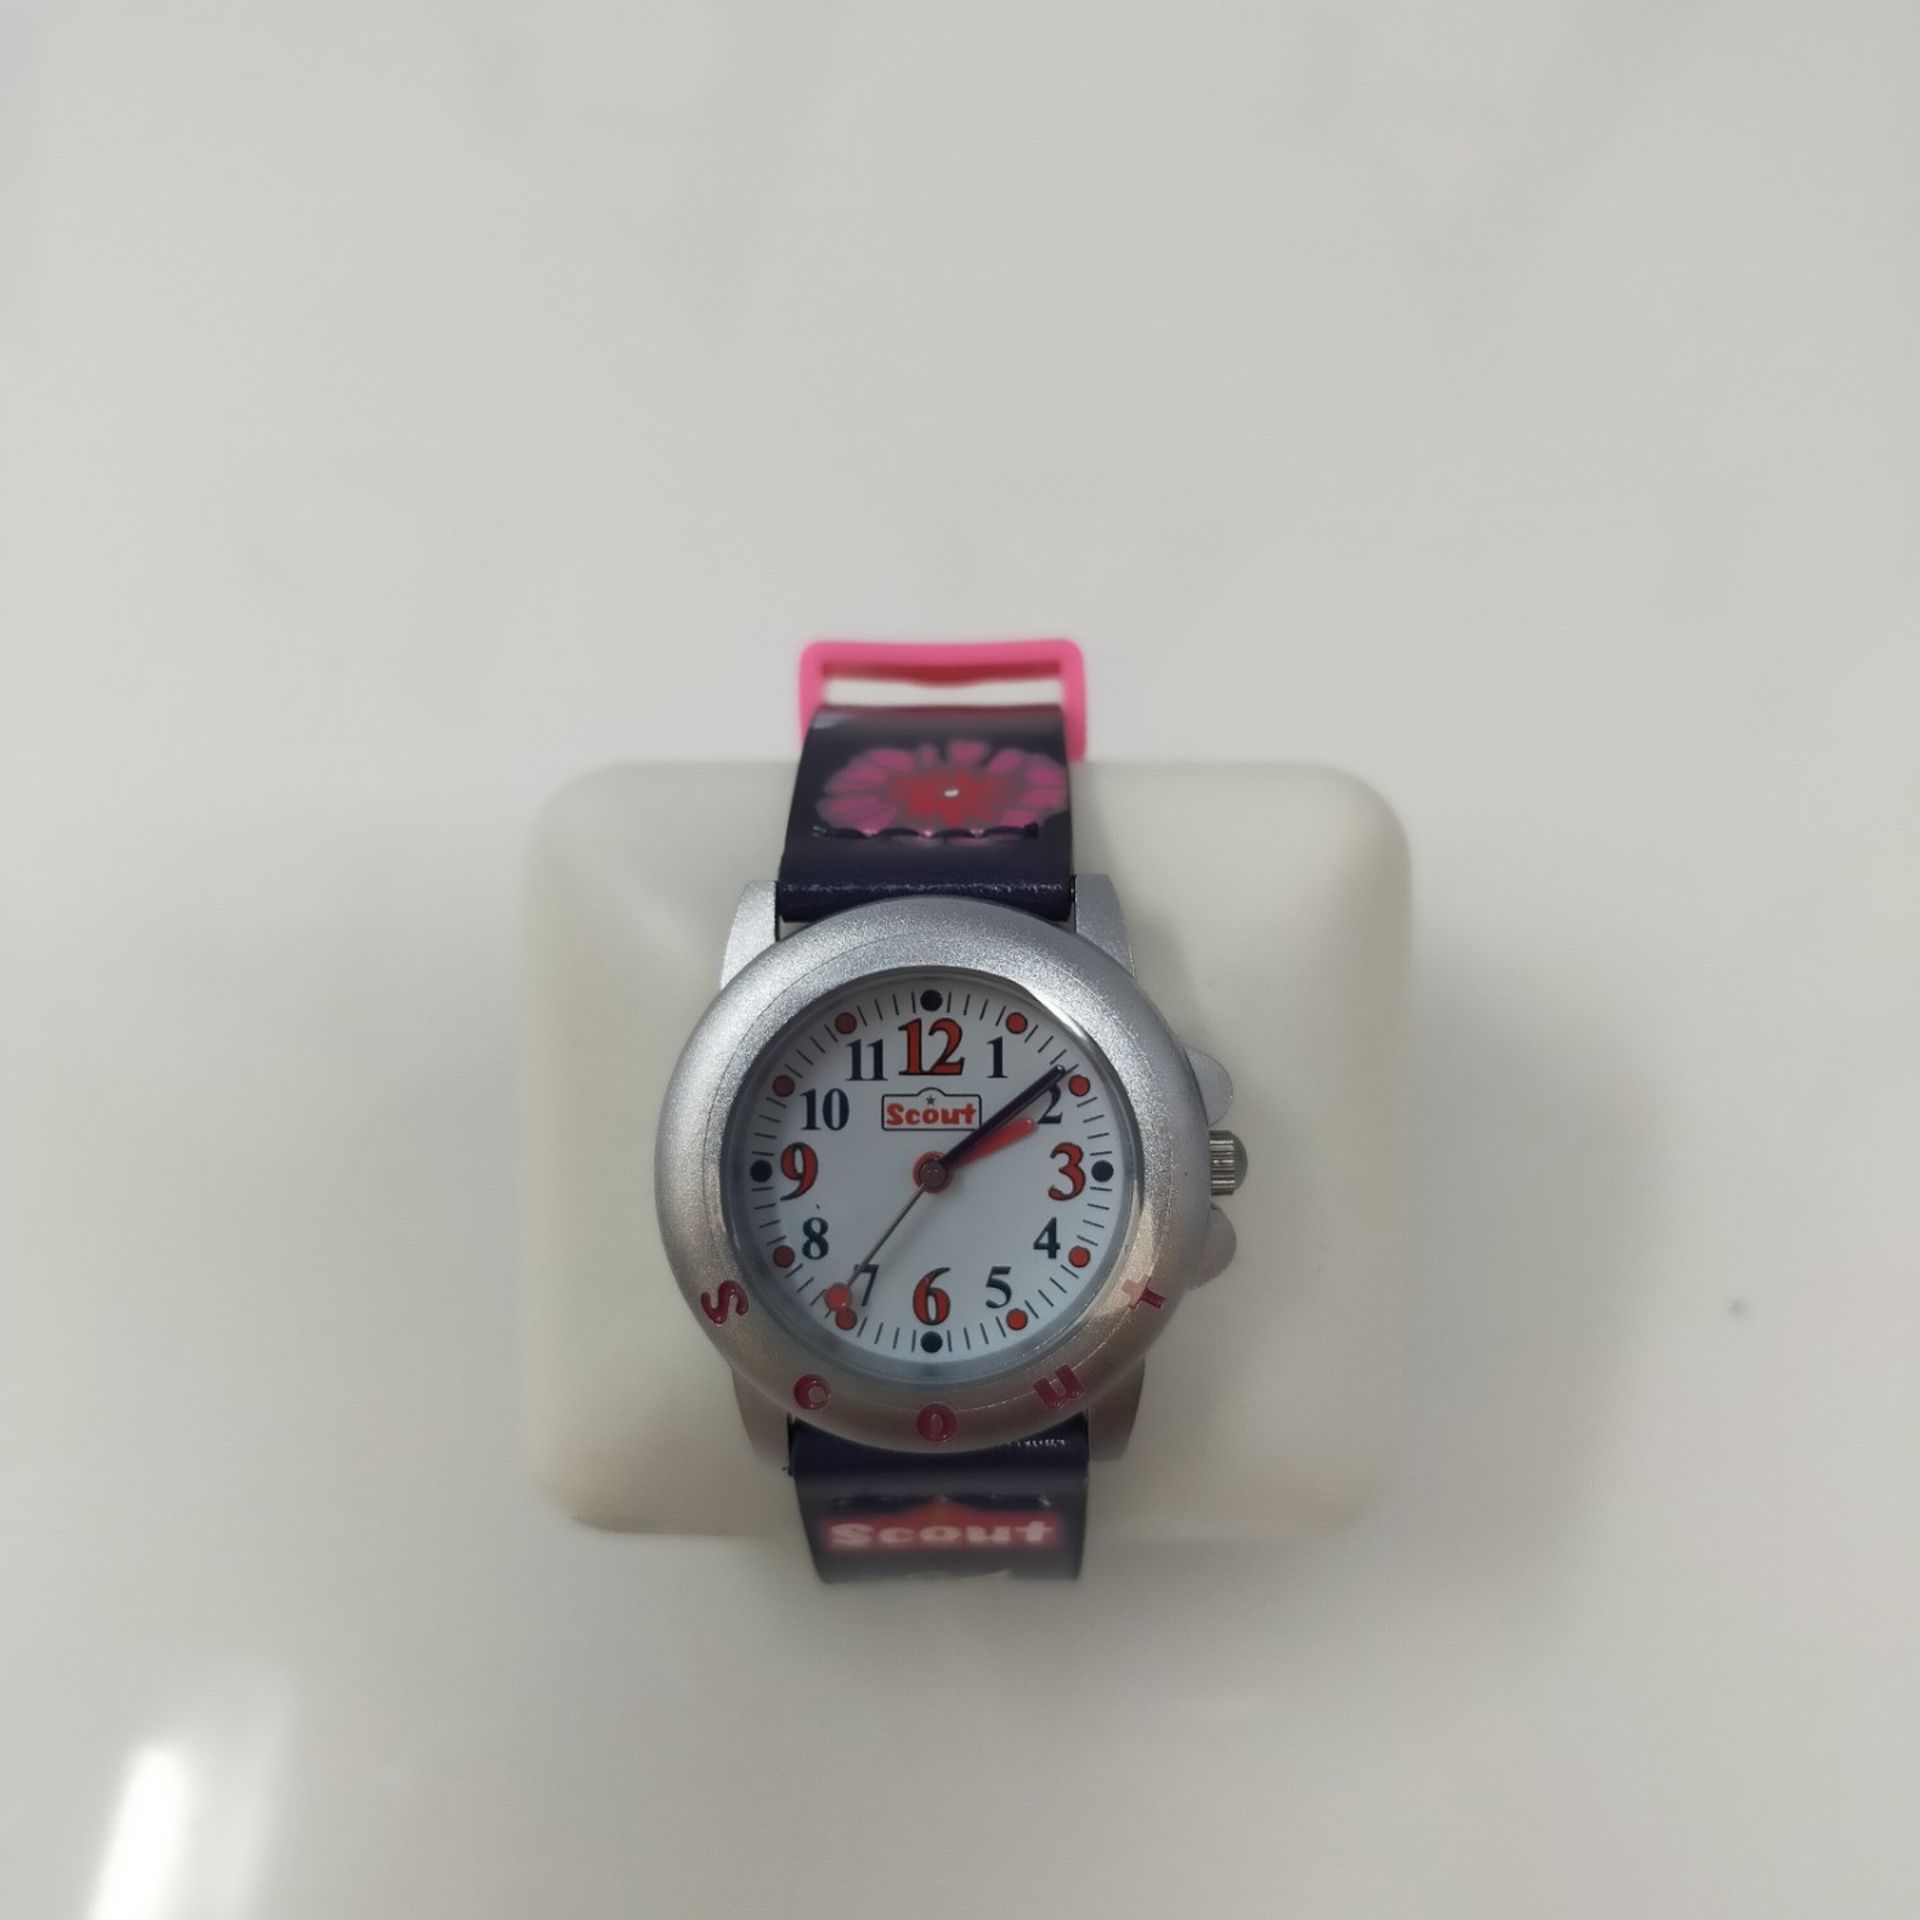 SCOUT Girls Analogue Quartz Watch with PU Strap 280393006 - Image 2 of 3